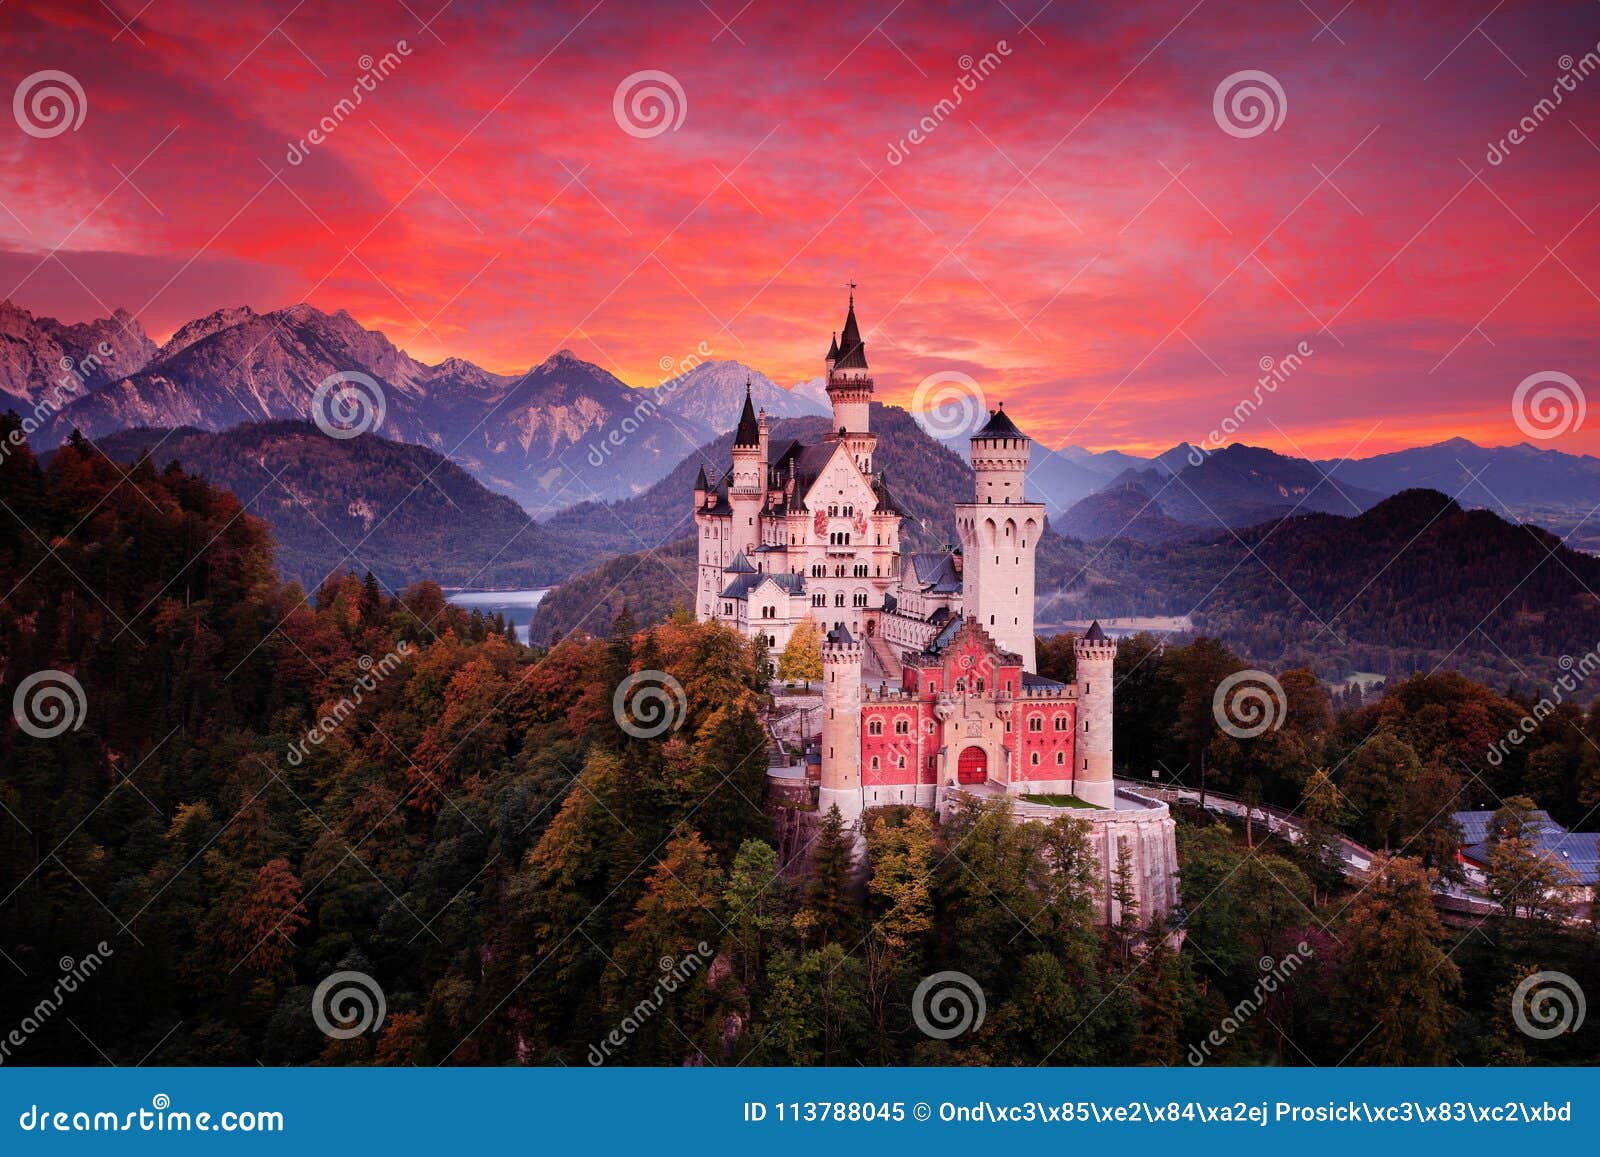 neuschwanstein fairy tale castle. beautiful sunset view of the bloody clouds with autumn colours in trees, twilight night, bavaria